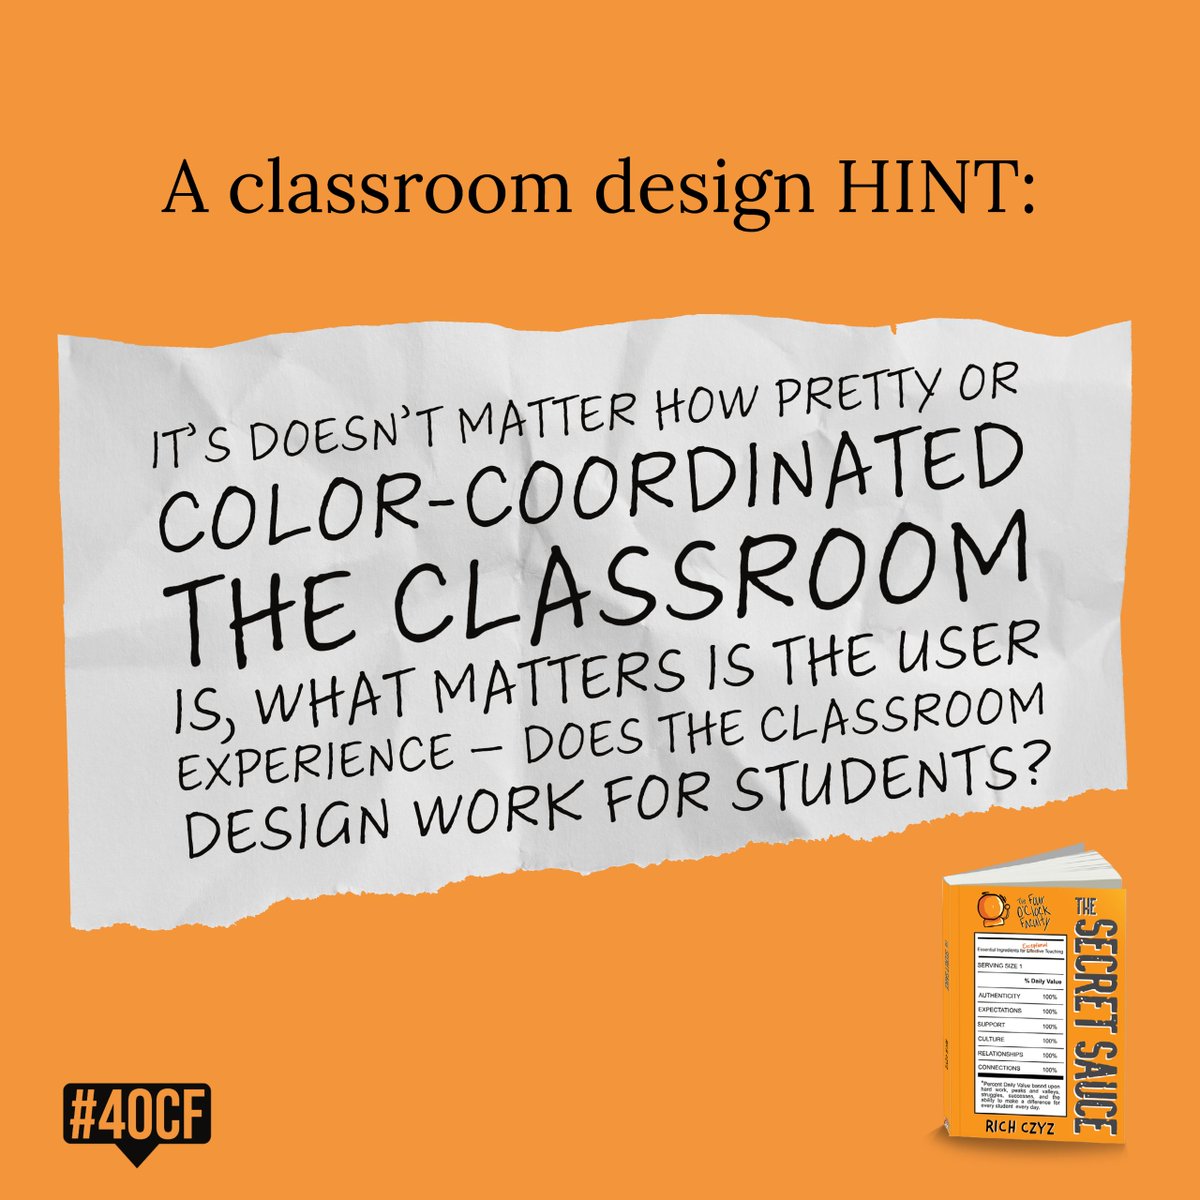 As you design/decorate your classroom ask yourself just one question: 

DOES THE CLASSROOM DESIGN WORK FOR STUDENTS?

fouroclockfaculty.com/2022/08/be-int…

#4OCF #TheSECRETSAUCE #classroomdesign #design @SteinbrinkLaura @burgessdave @TaraMartinEDU @dbc_inc @JayBilly2 

amzn.to/3HEnlSl